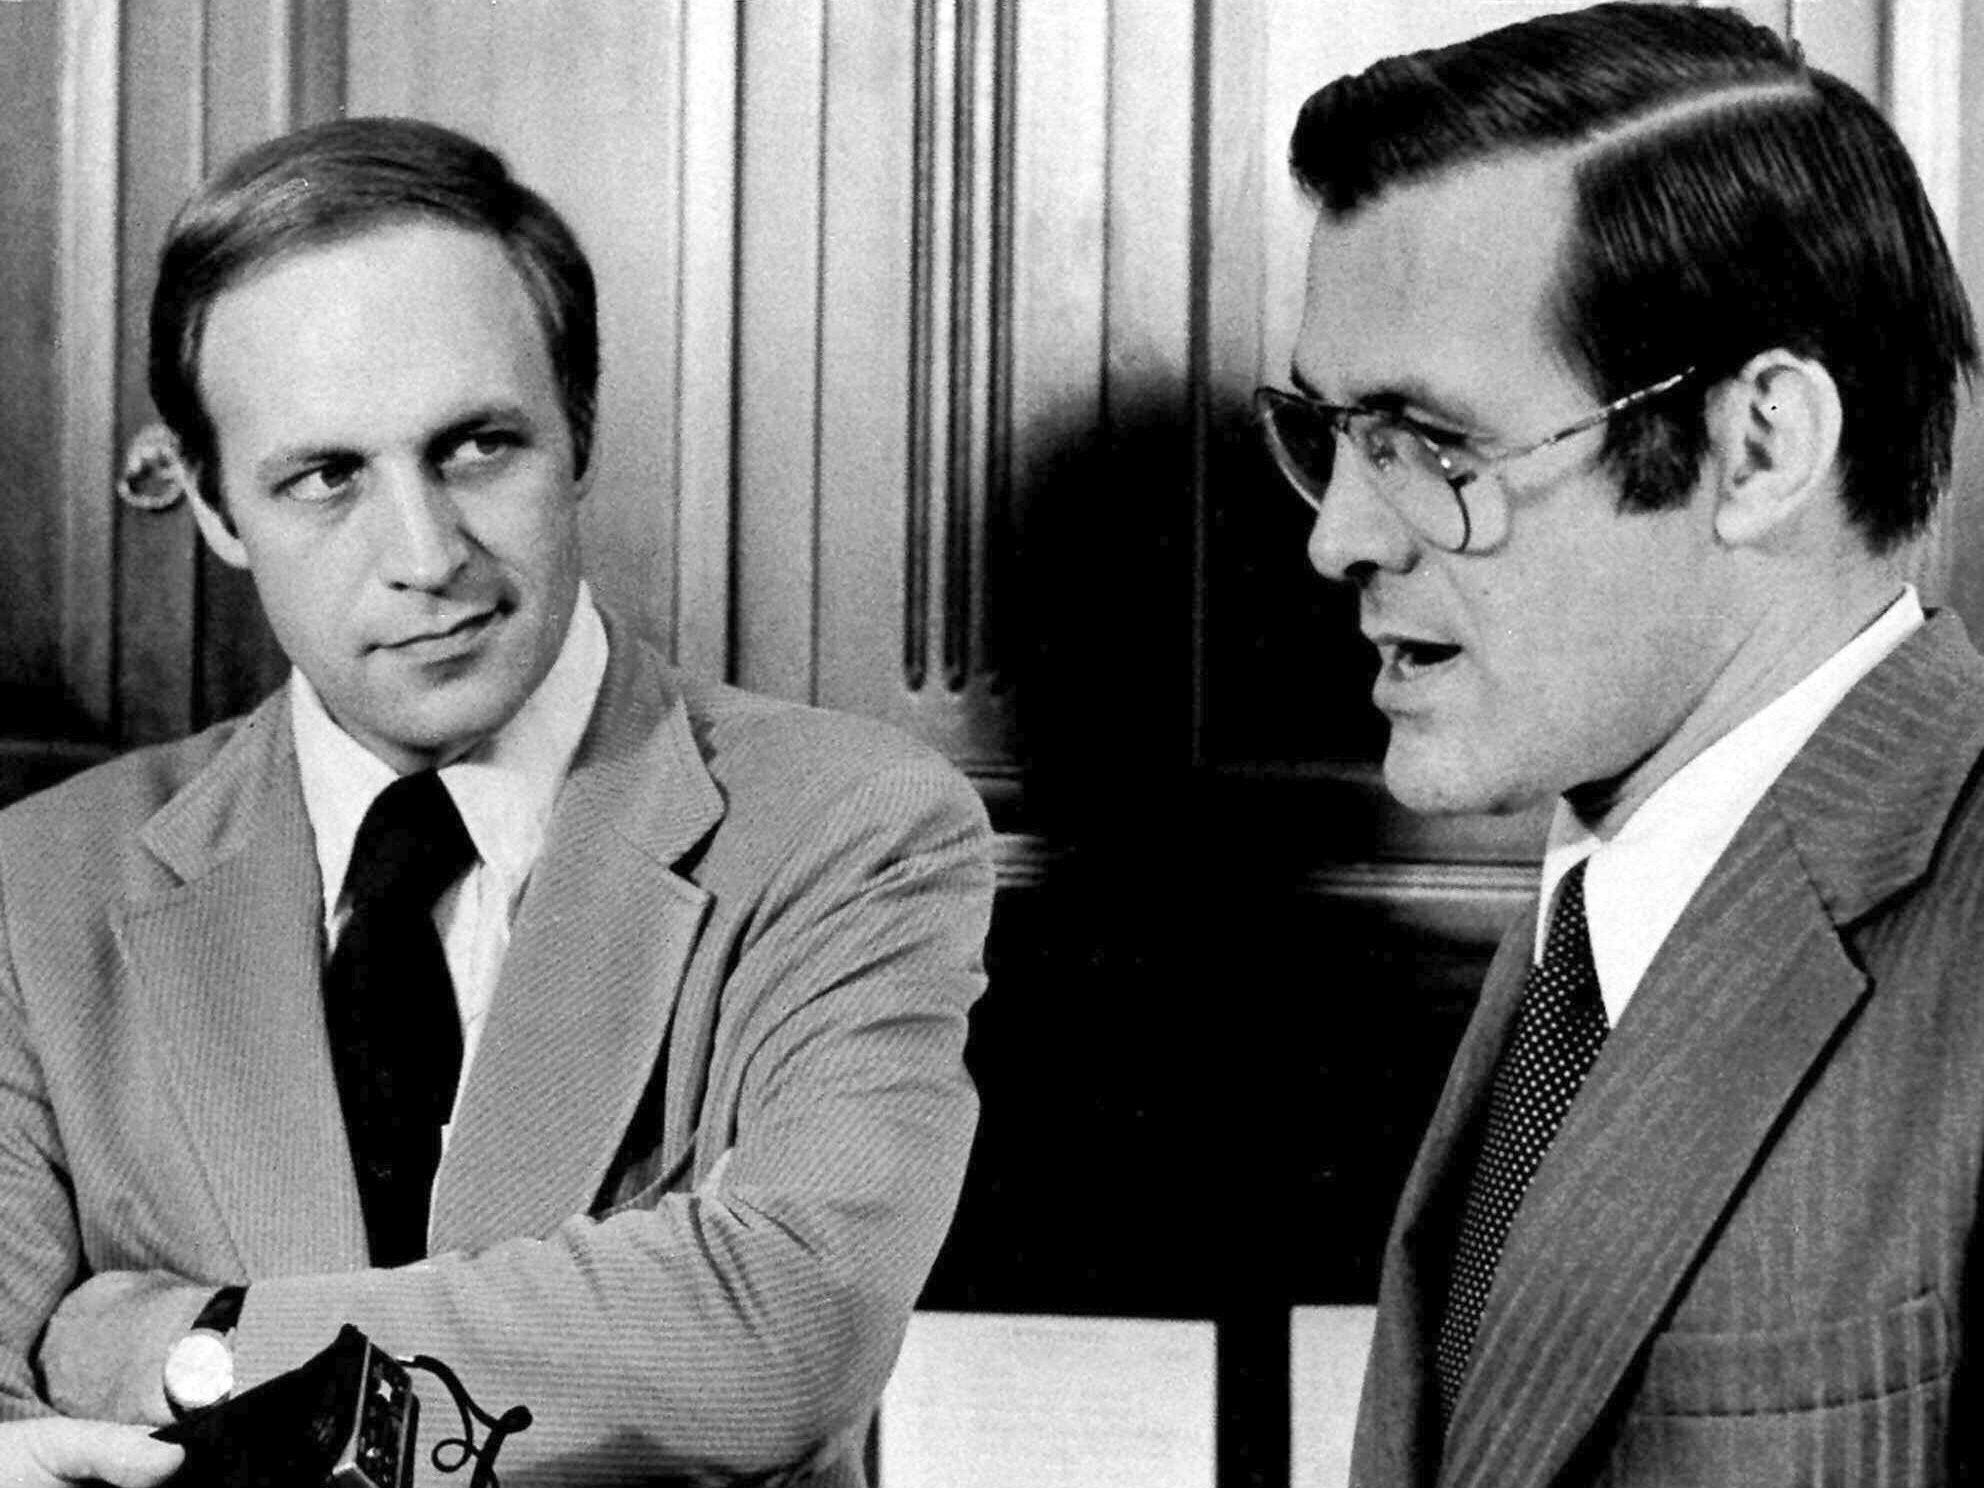 Rumsfeld (right) with Richard Cheney in 1975